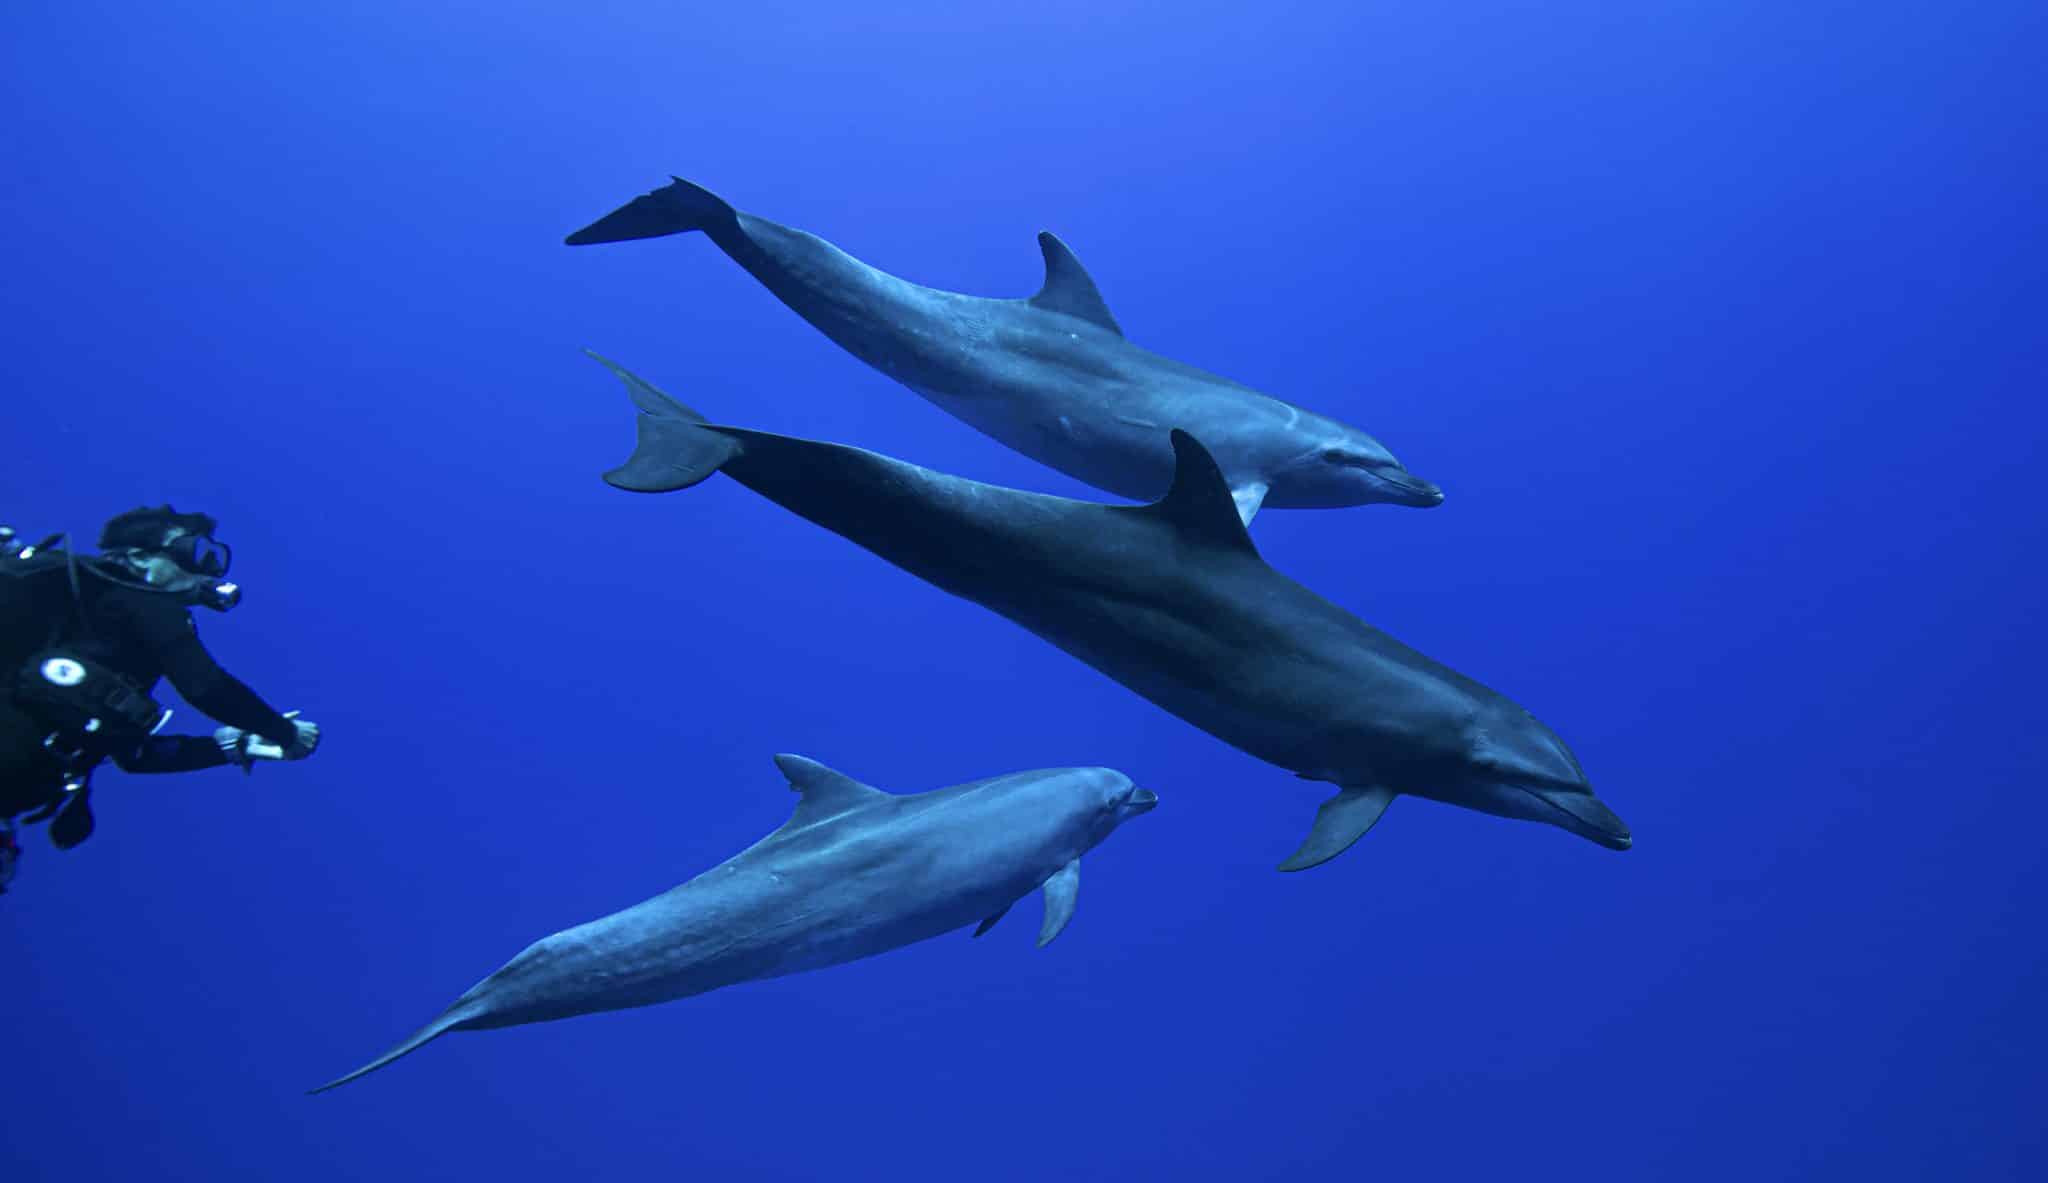 Ecological monitoring of bottlenose dolphins in Polynesia